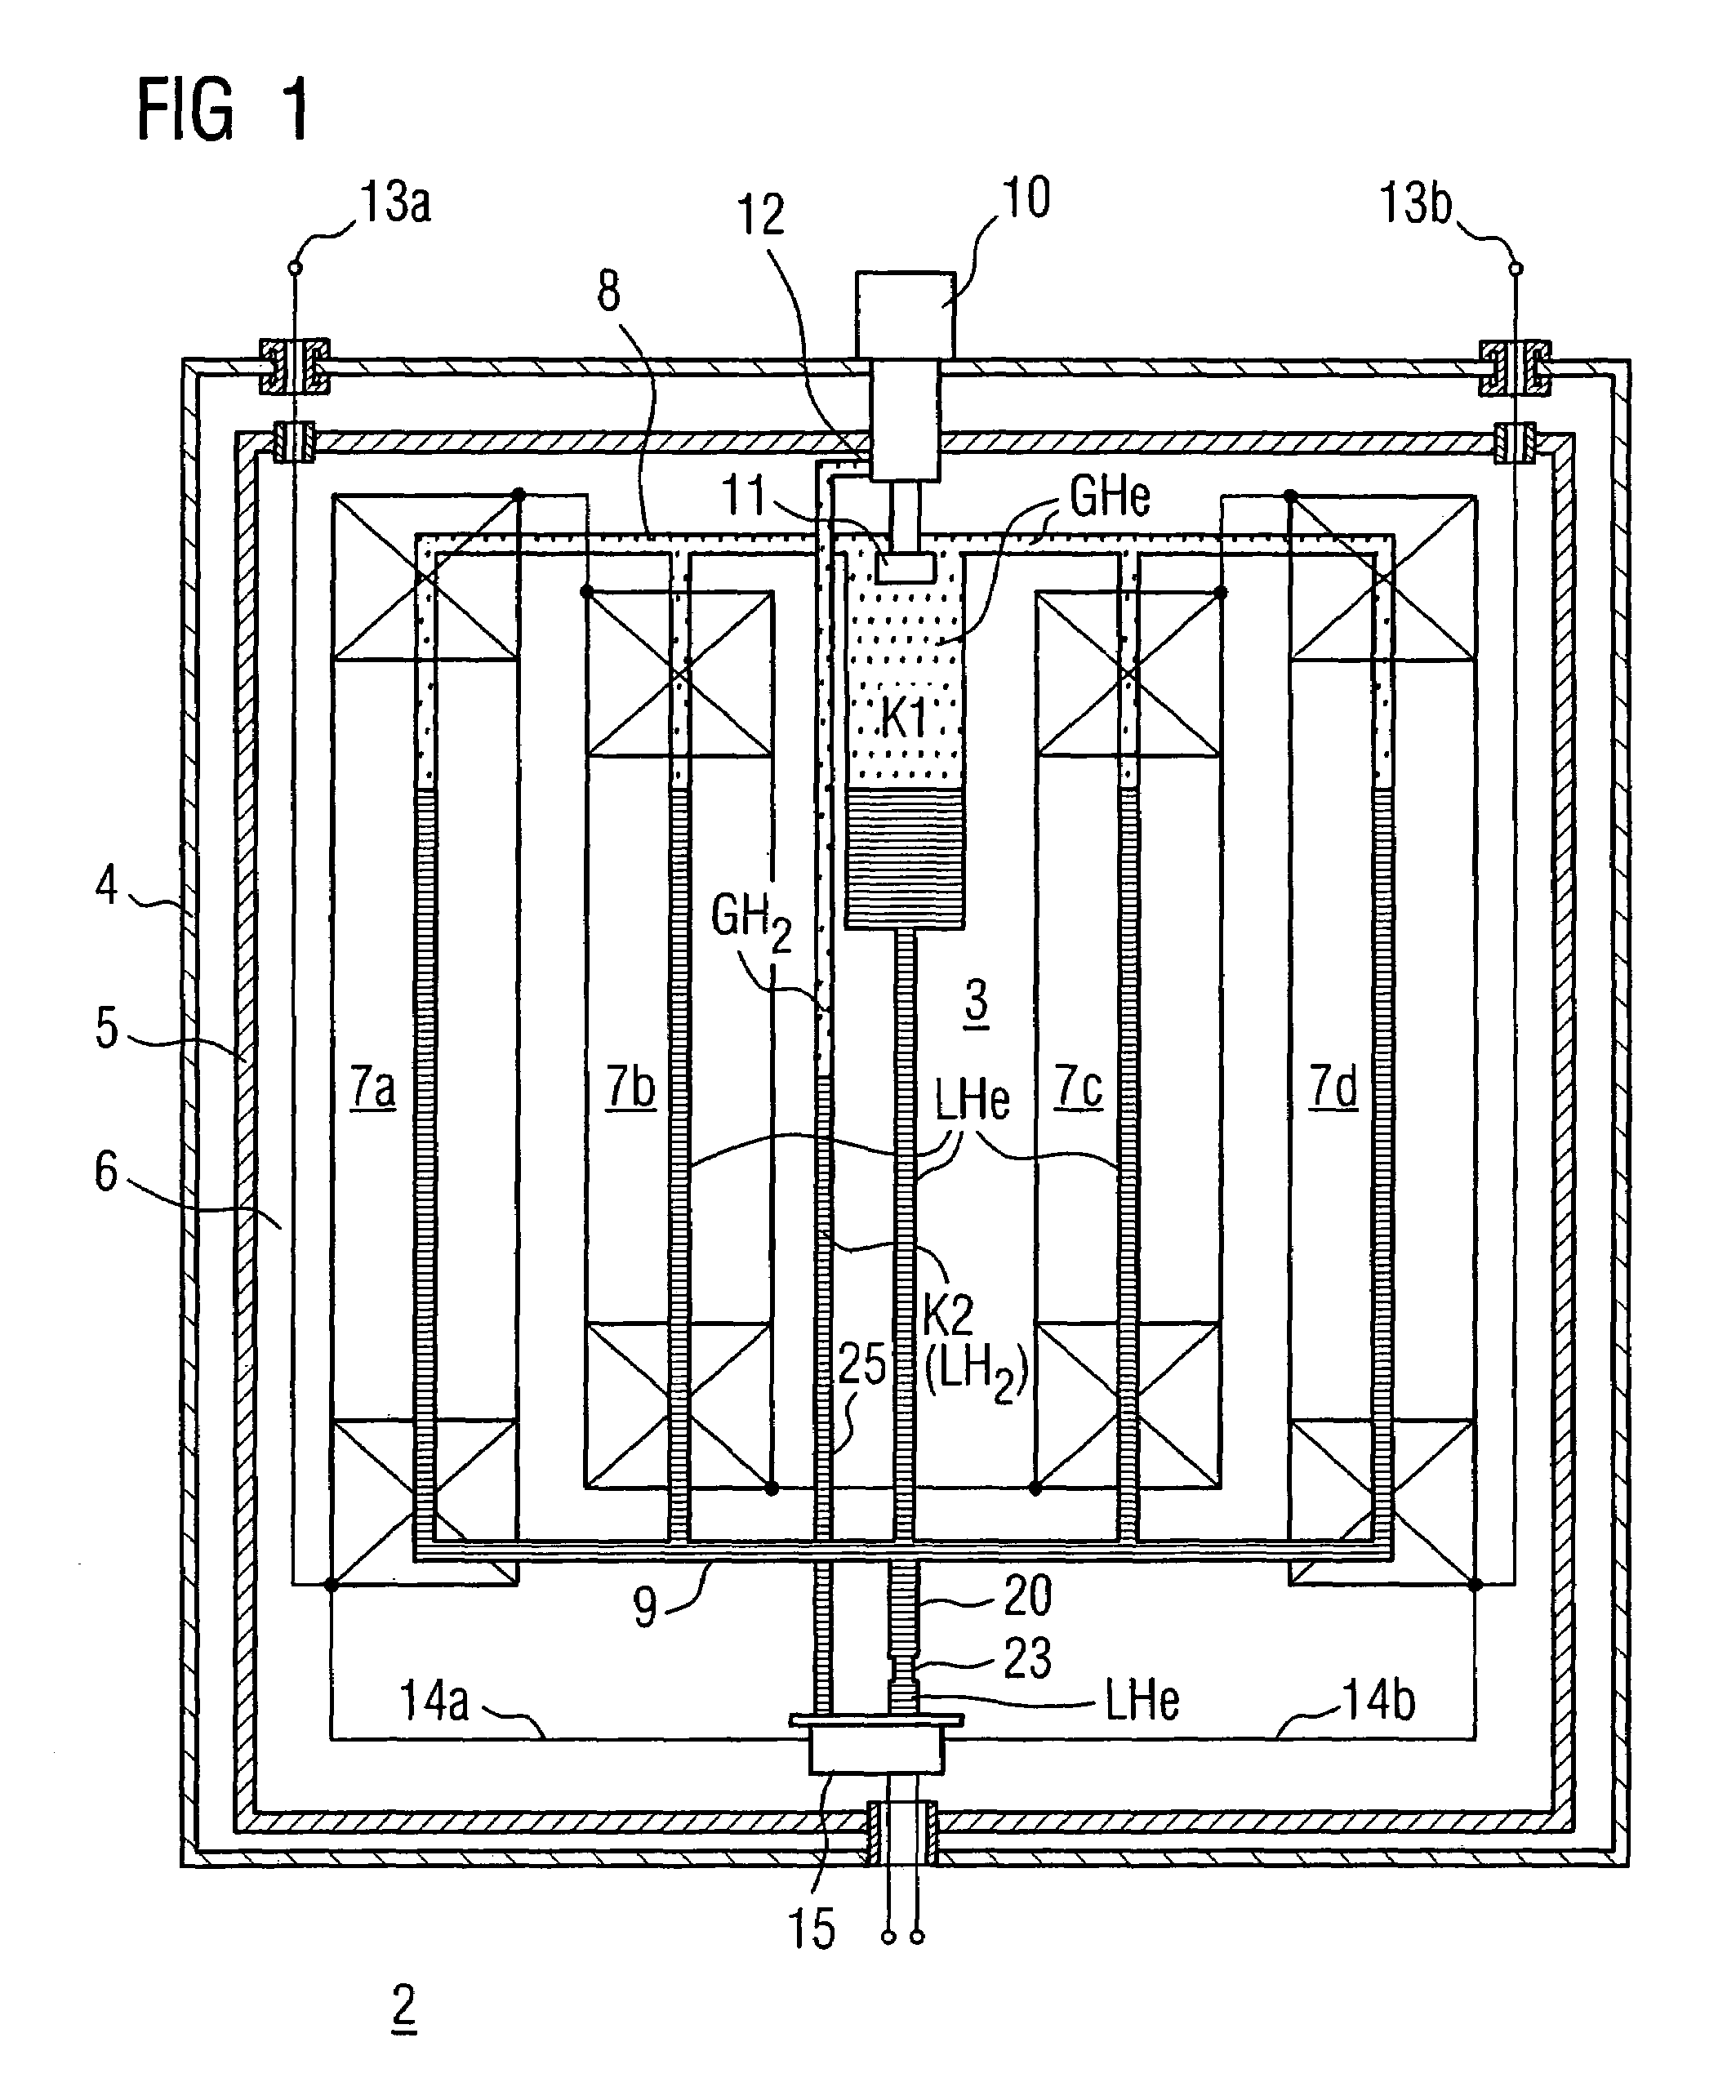 Superconducting device having a cryogenic system and a superconducting switch